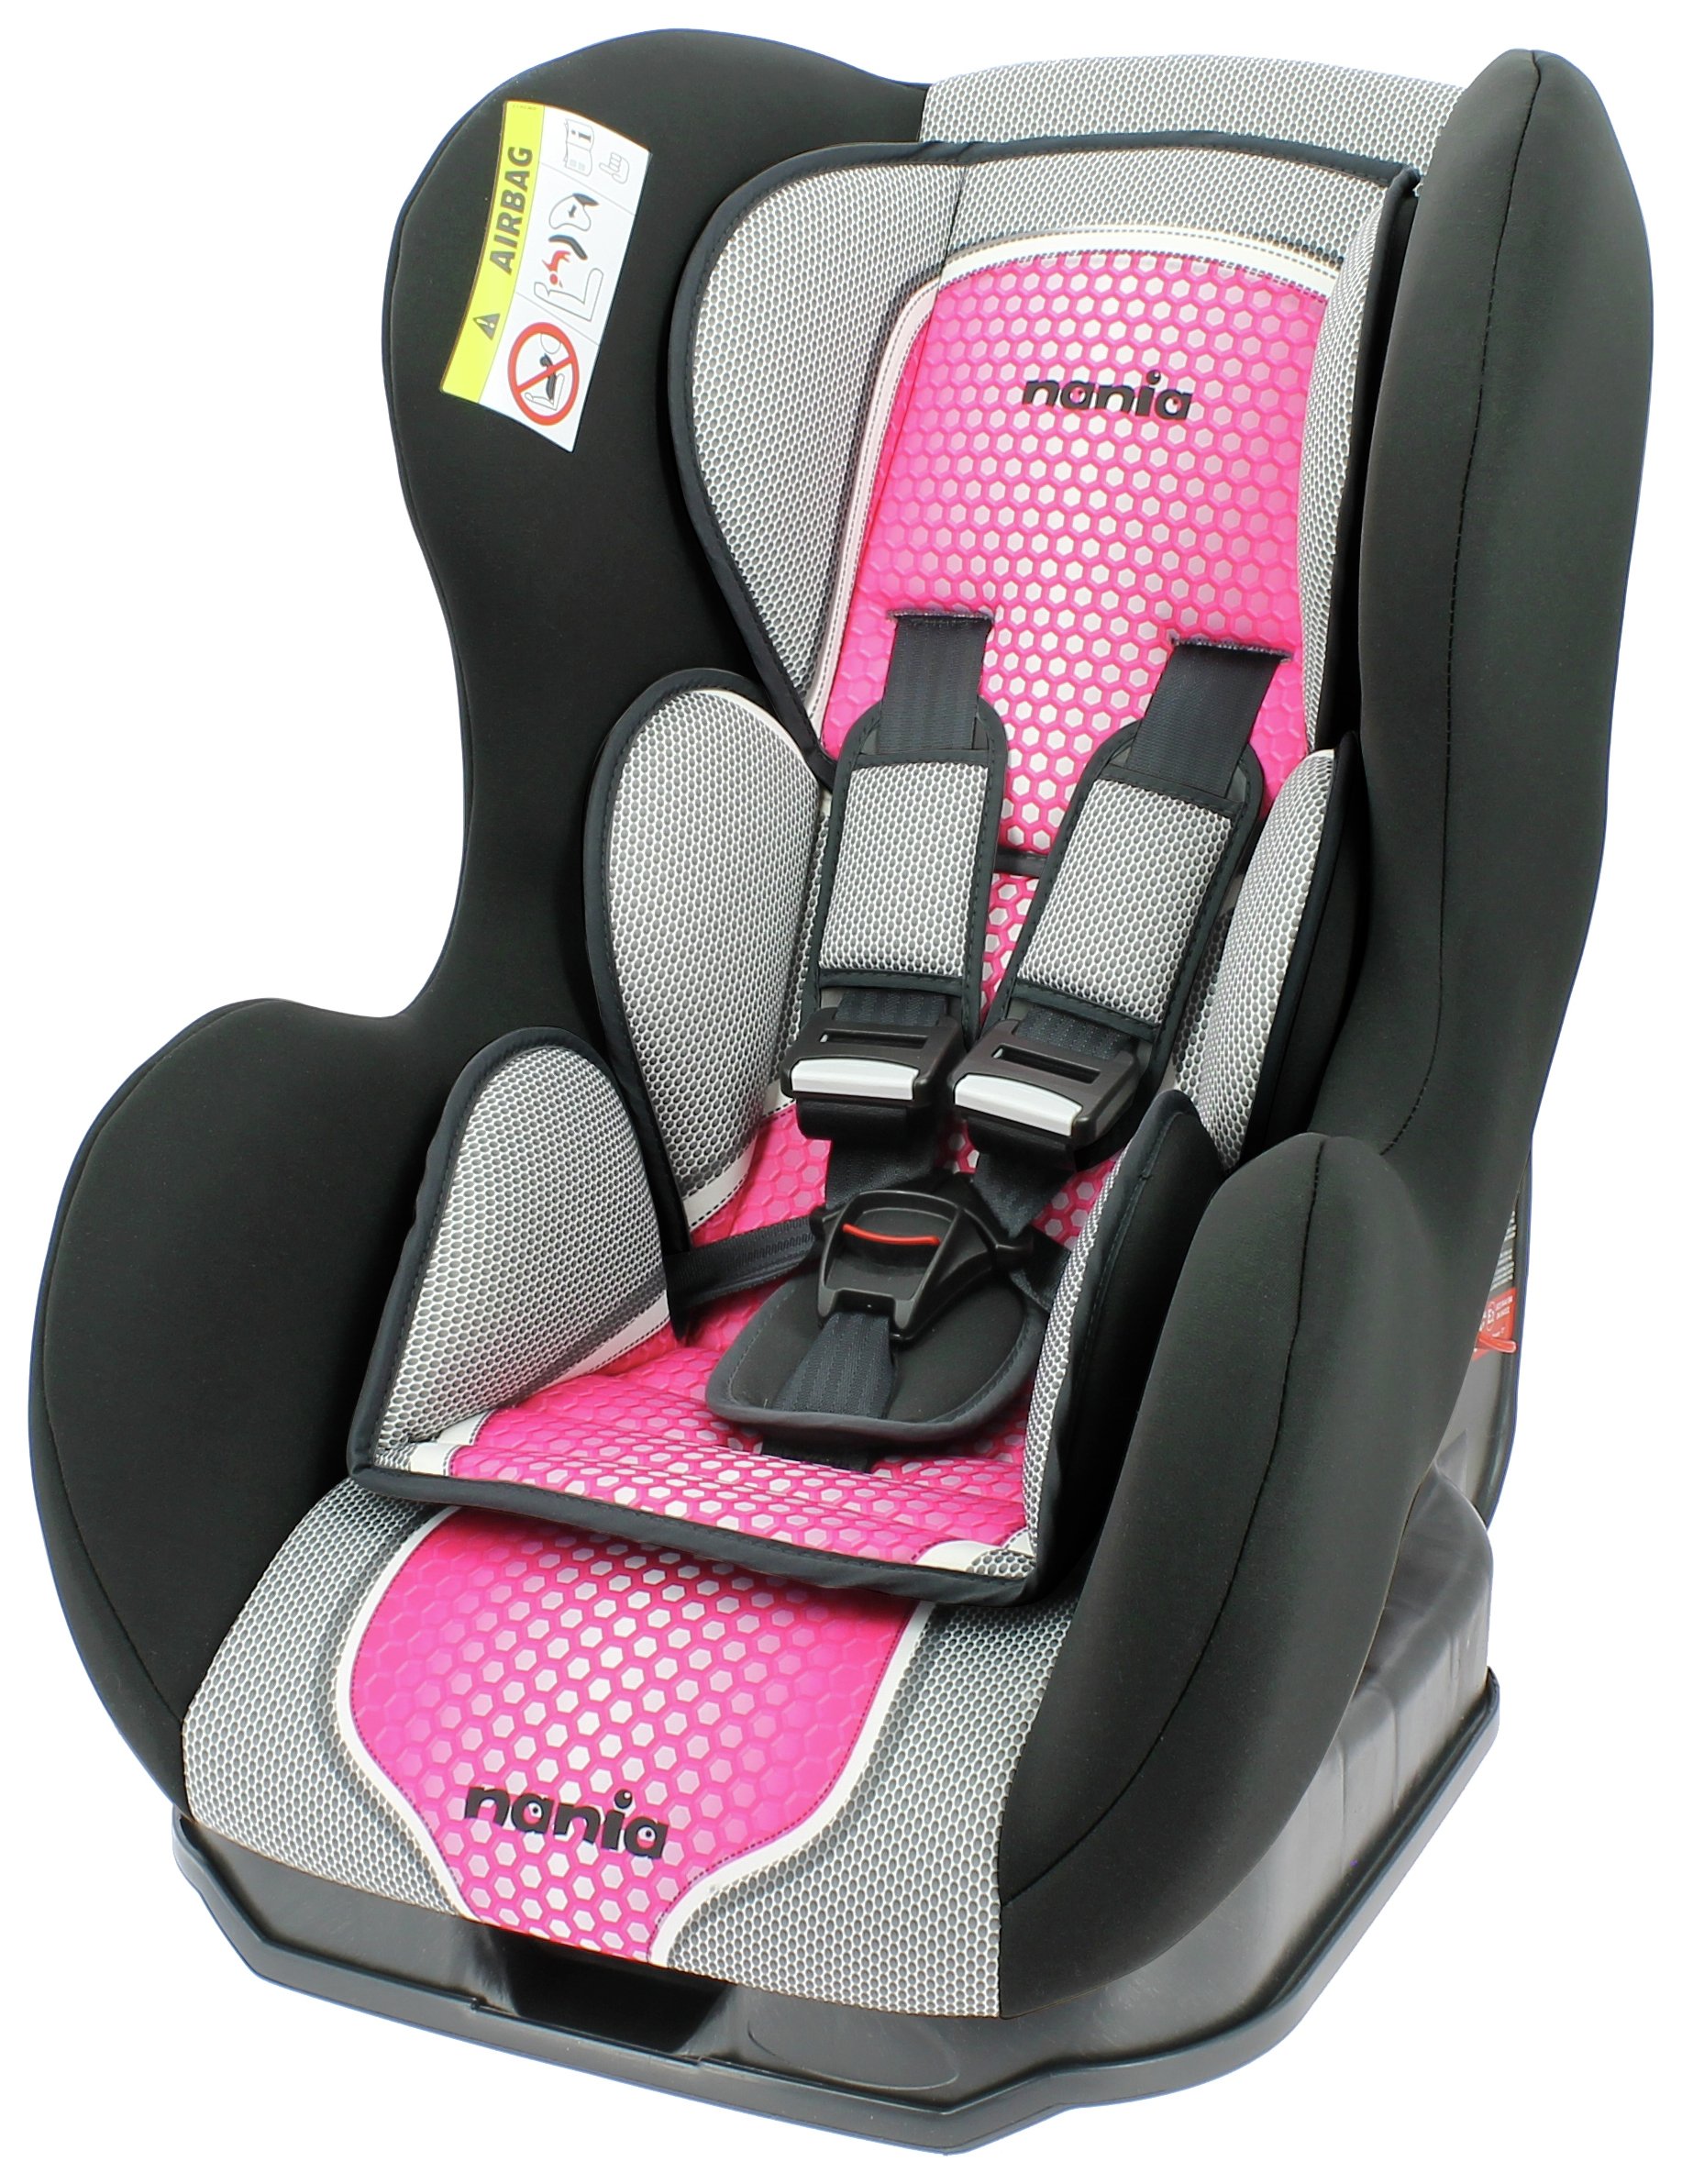 Cosmo Isofix Car Seat for Kids 9 to 18 kg NANIA Agora Pink Group 1 